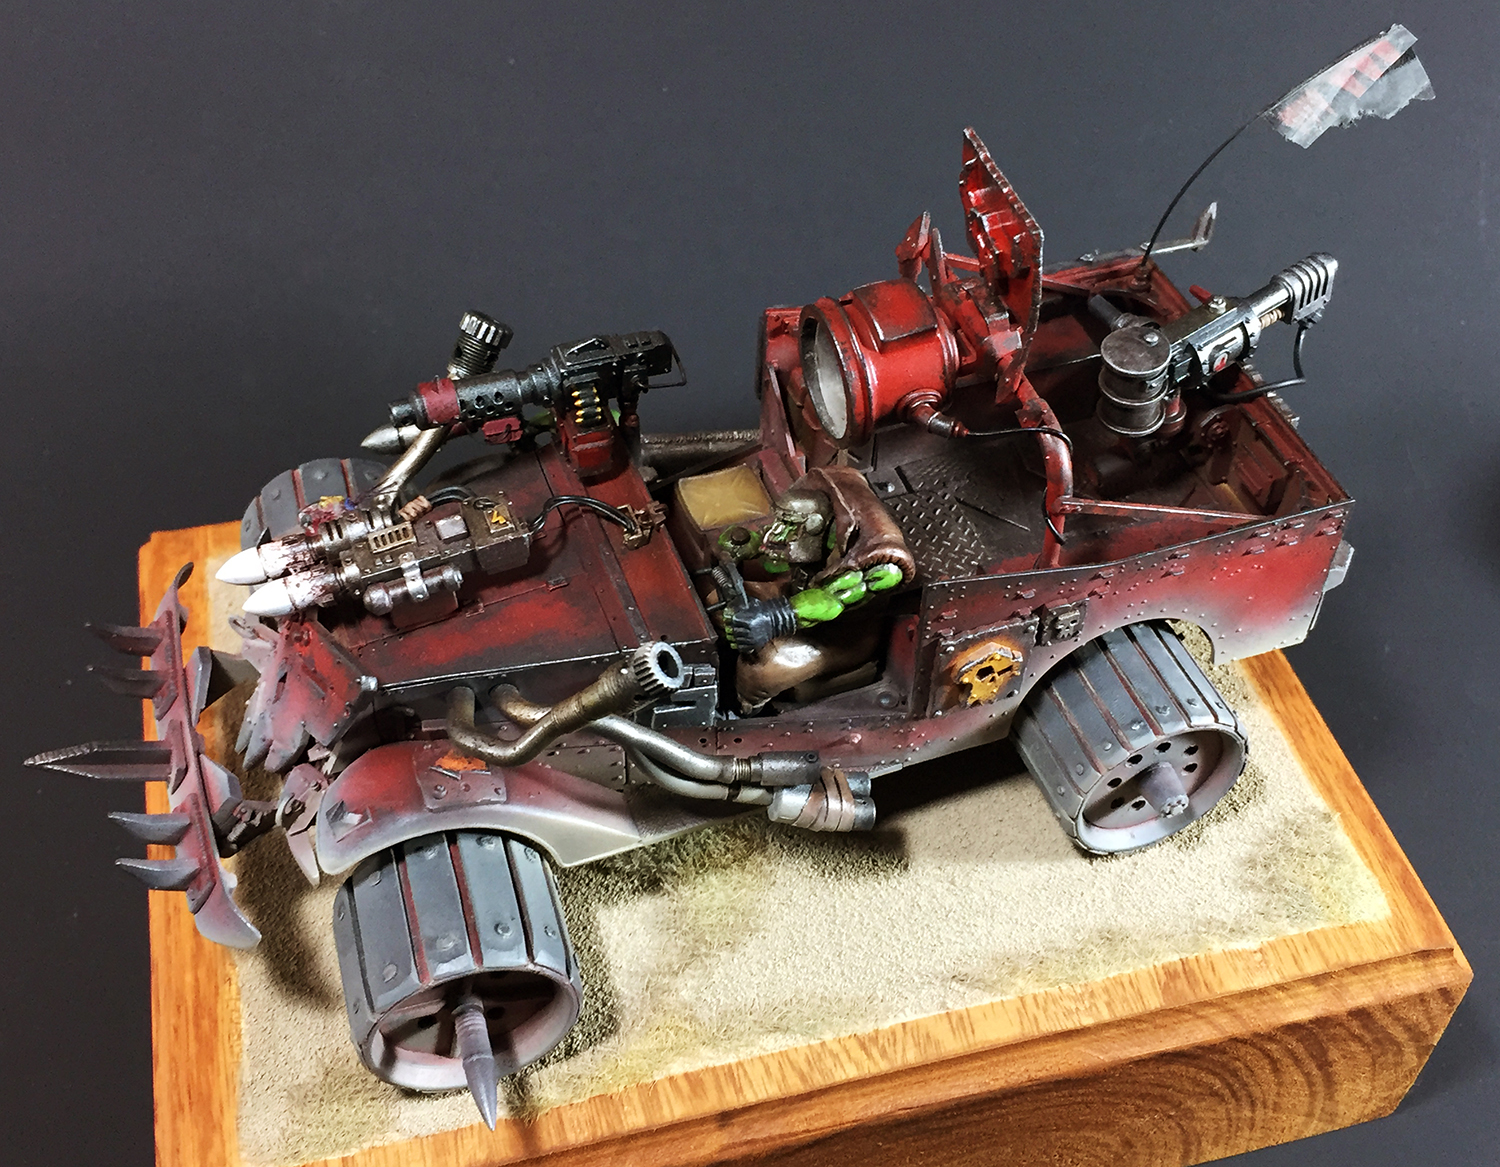 Warhammer 40000 toy. Вархаммер Conversion багги. Wh40k Orks Baggy scratchbuild. WH 40k Orks Air. Ork Buggy.